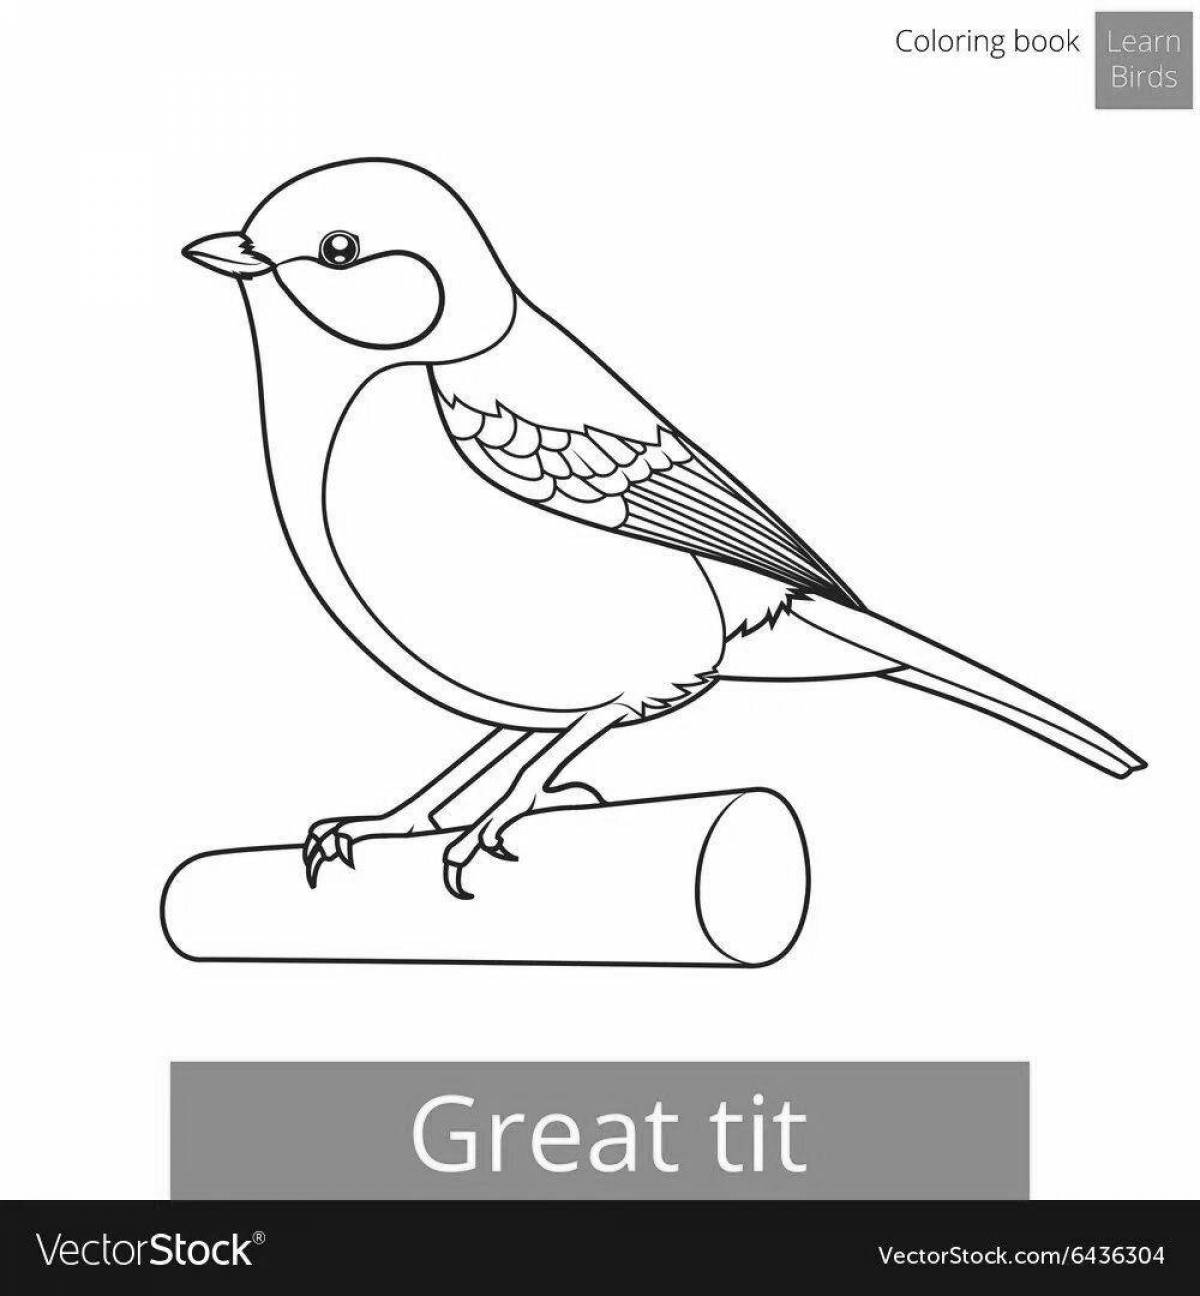 Children's titmouse coloring book for 3-4 year olds